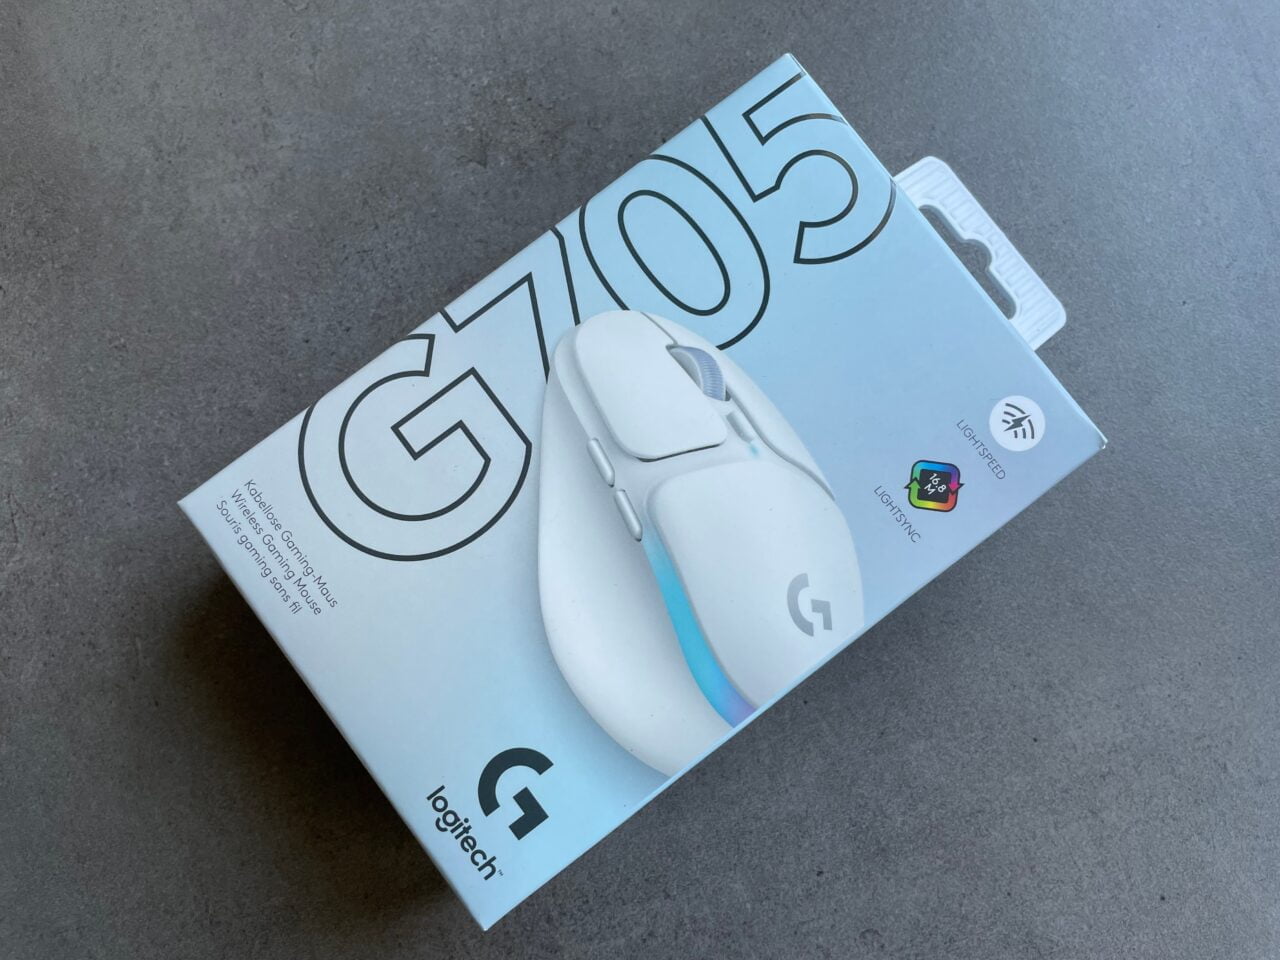 The packaging itself is small of G705 Wireless Mouse